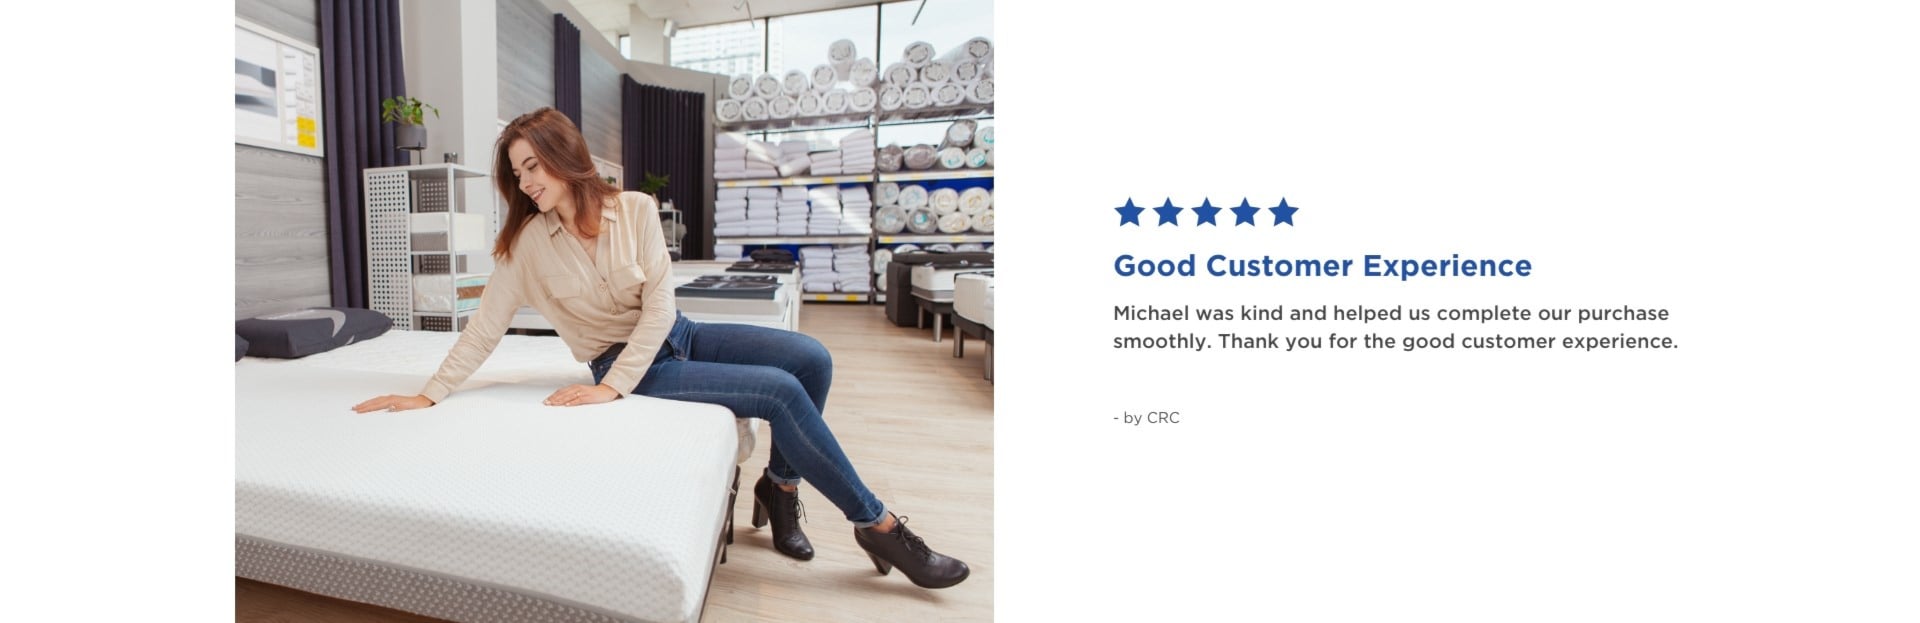 Good Customer Experience | 5 Stars | Michael was kind and helped us complete our purchase smoothly. Thank you for the good customer experience. - by CRC